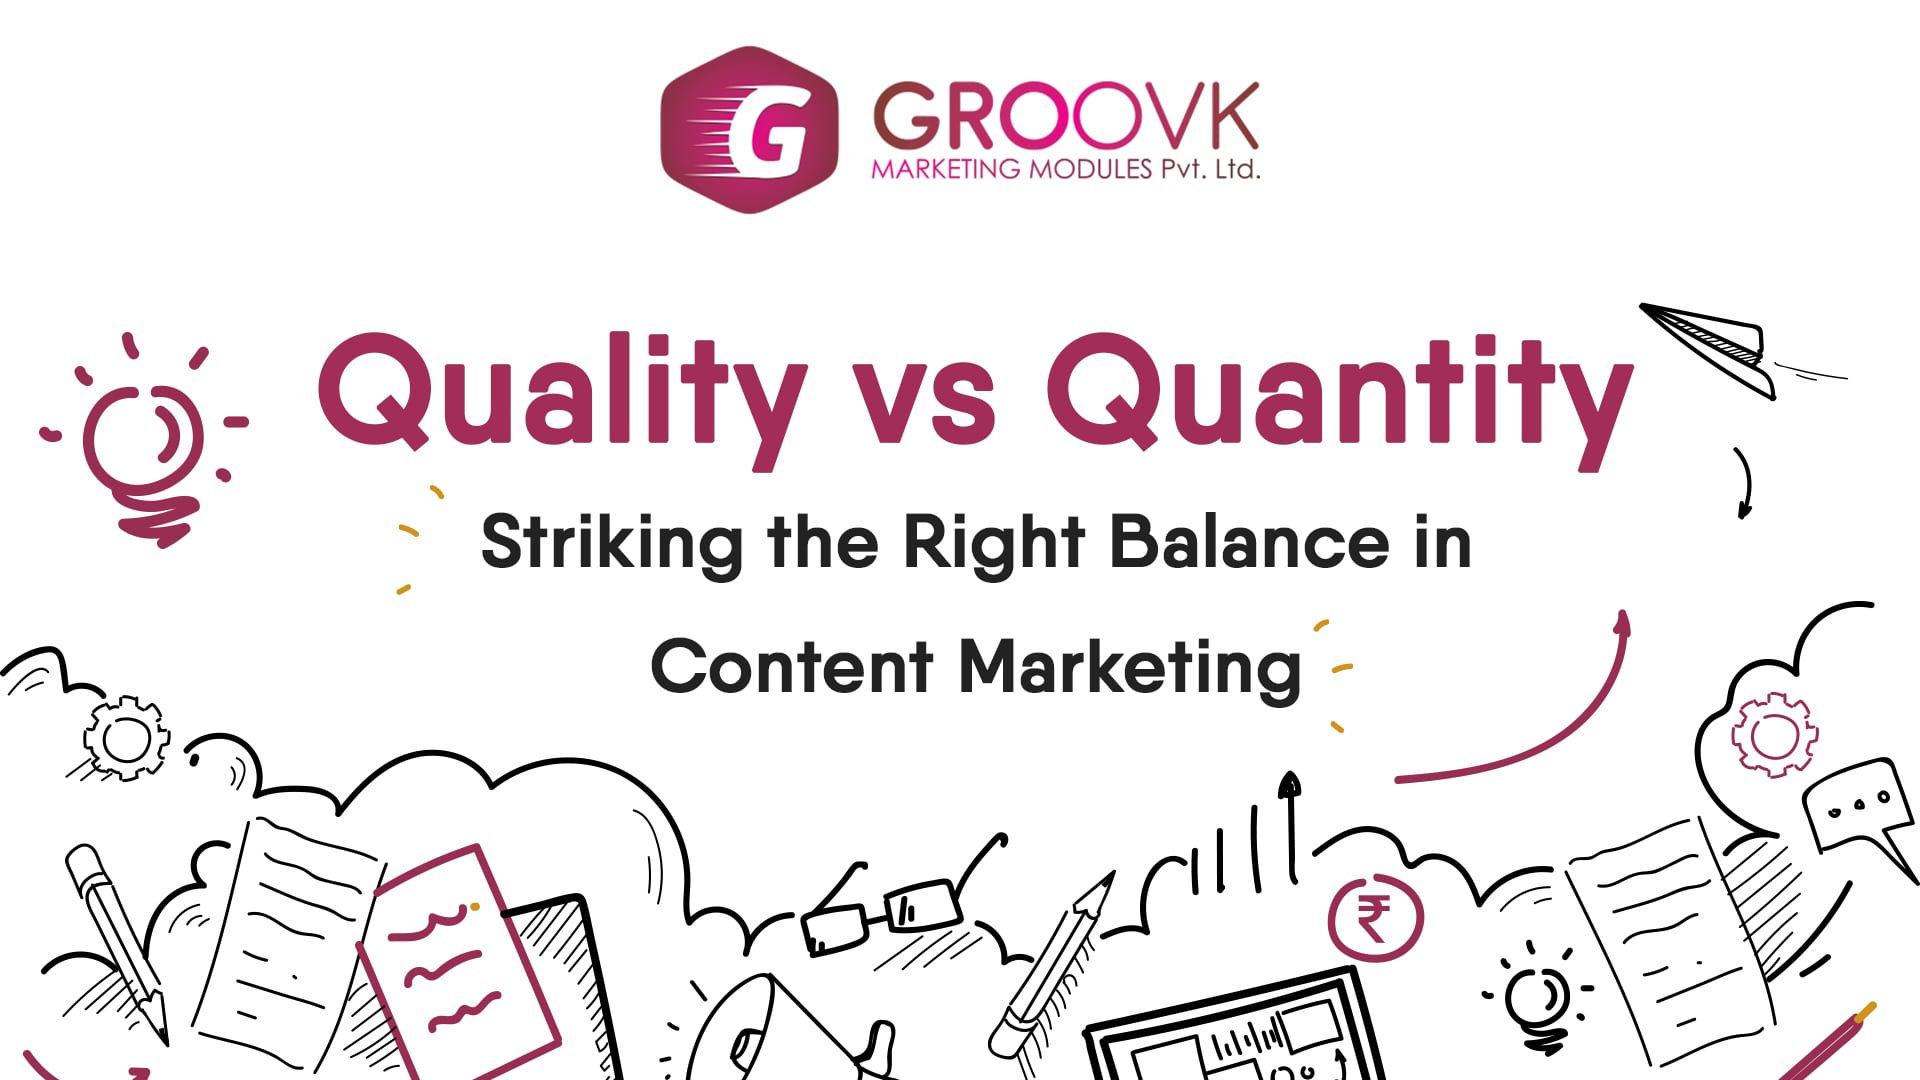 Striking the Right Balance in Content Marketing - Groovk Marketing
								